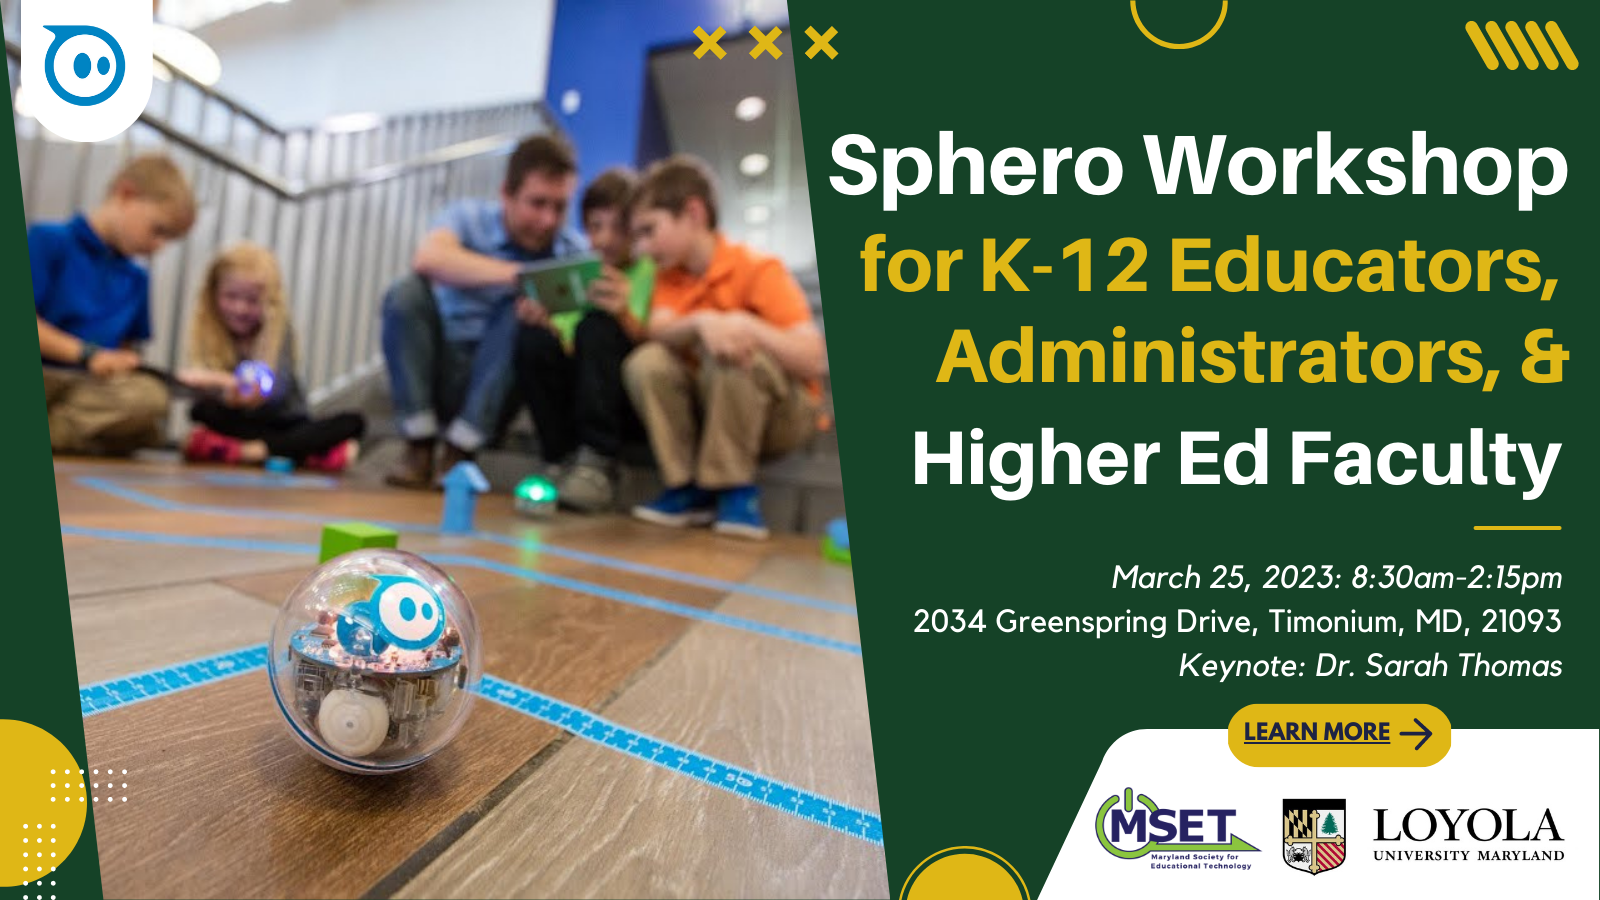 flyer for the Sphero Workshop for K-12 Educationa, Administrators, and Higher Ed Faculty